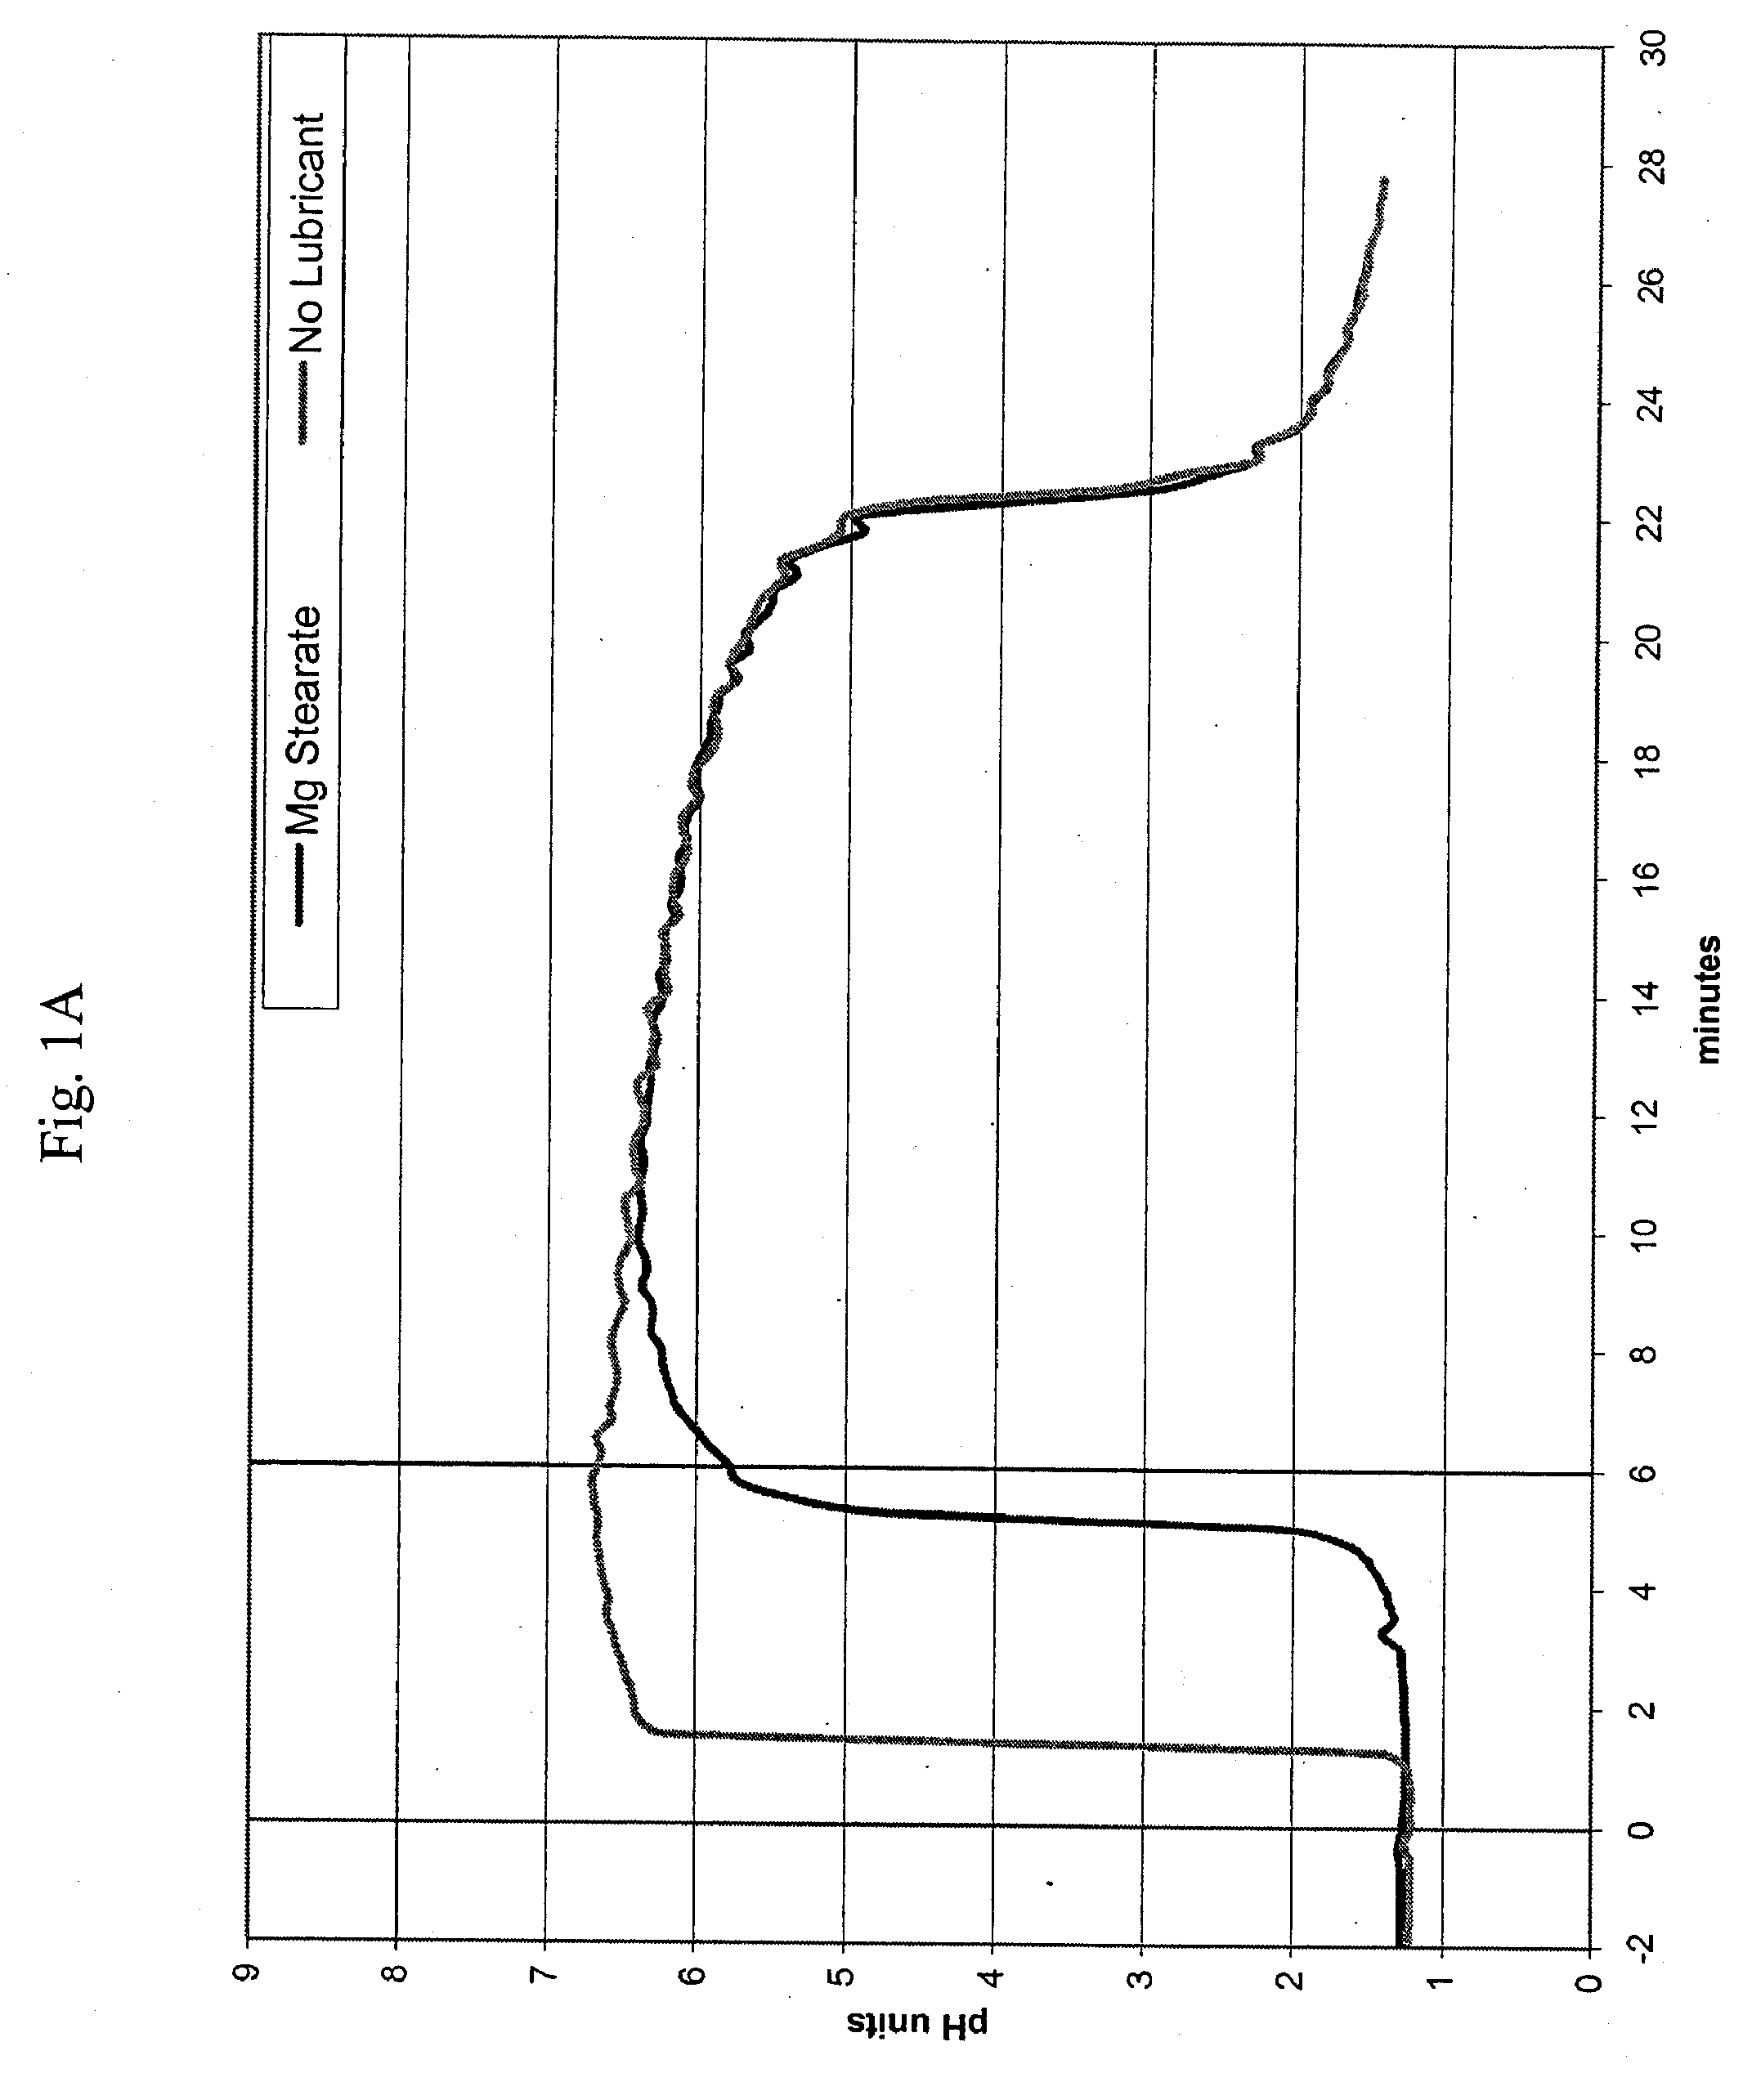 Novel formulations of proton pump inhibitors and methods of using these formulations